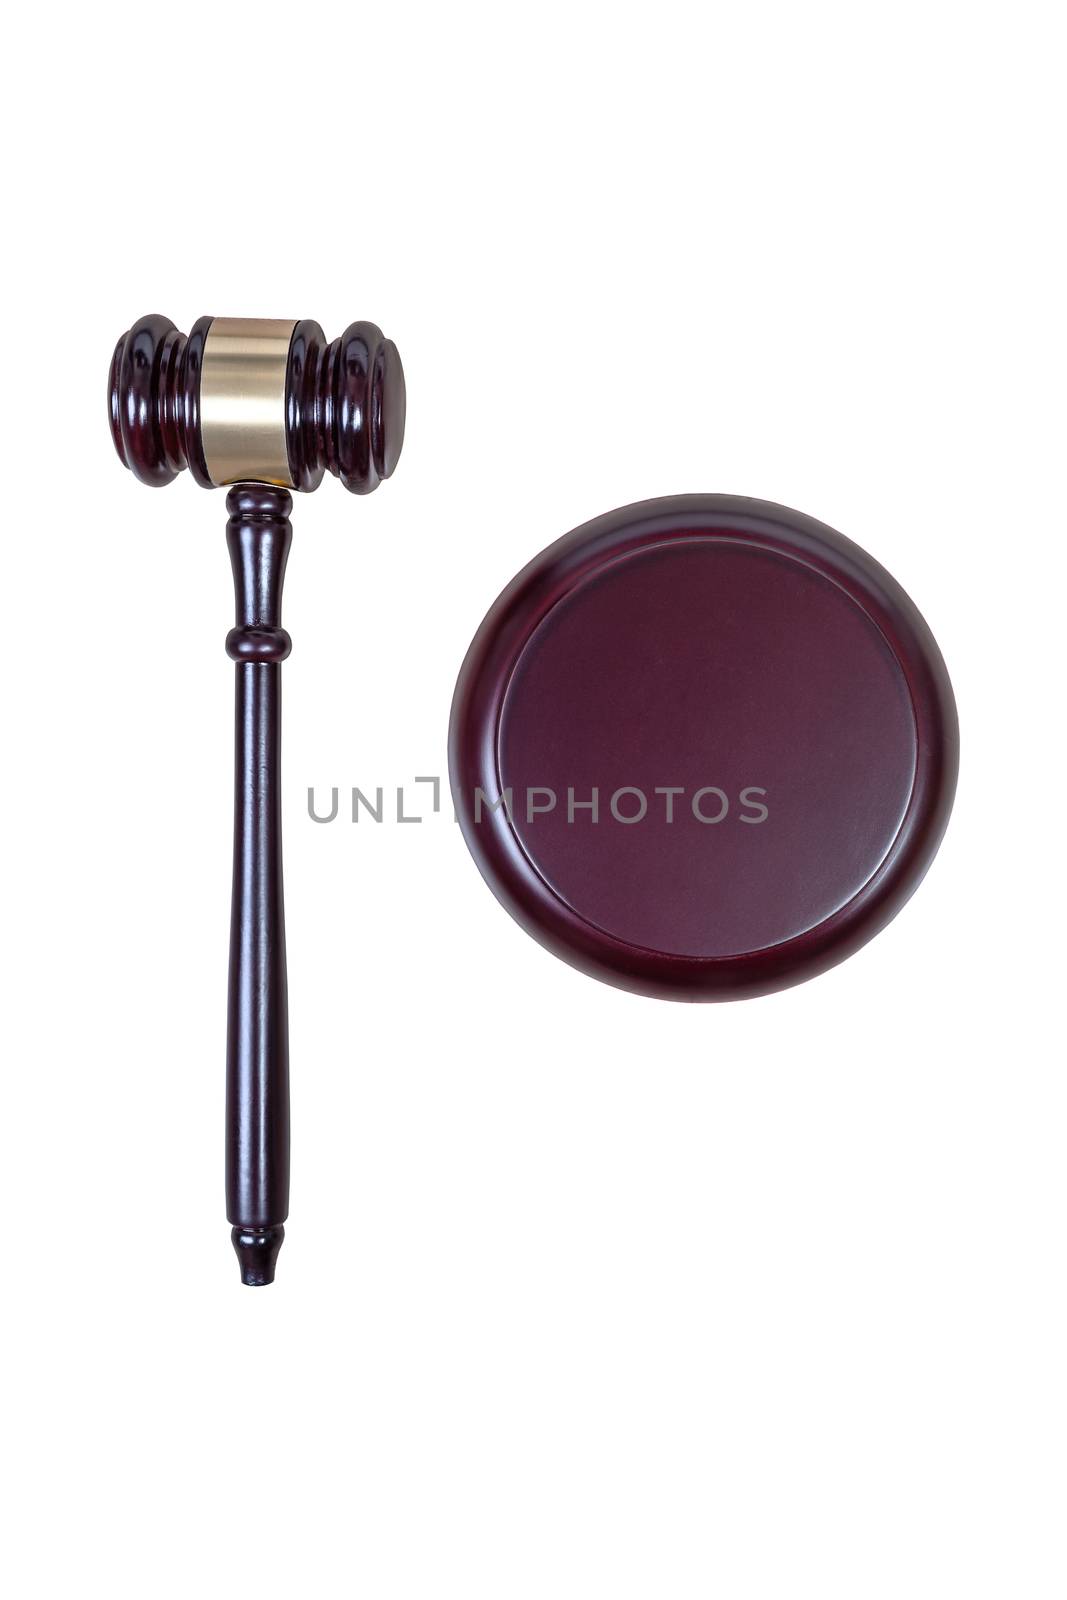 Justice hammer or judge gavel made from wooden isolated on white by FrameAngel